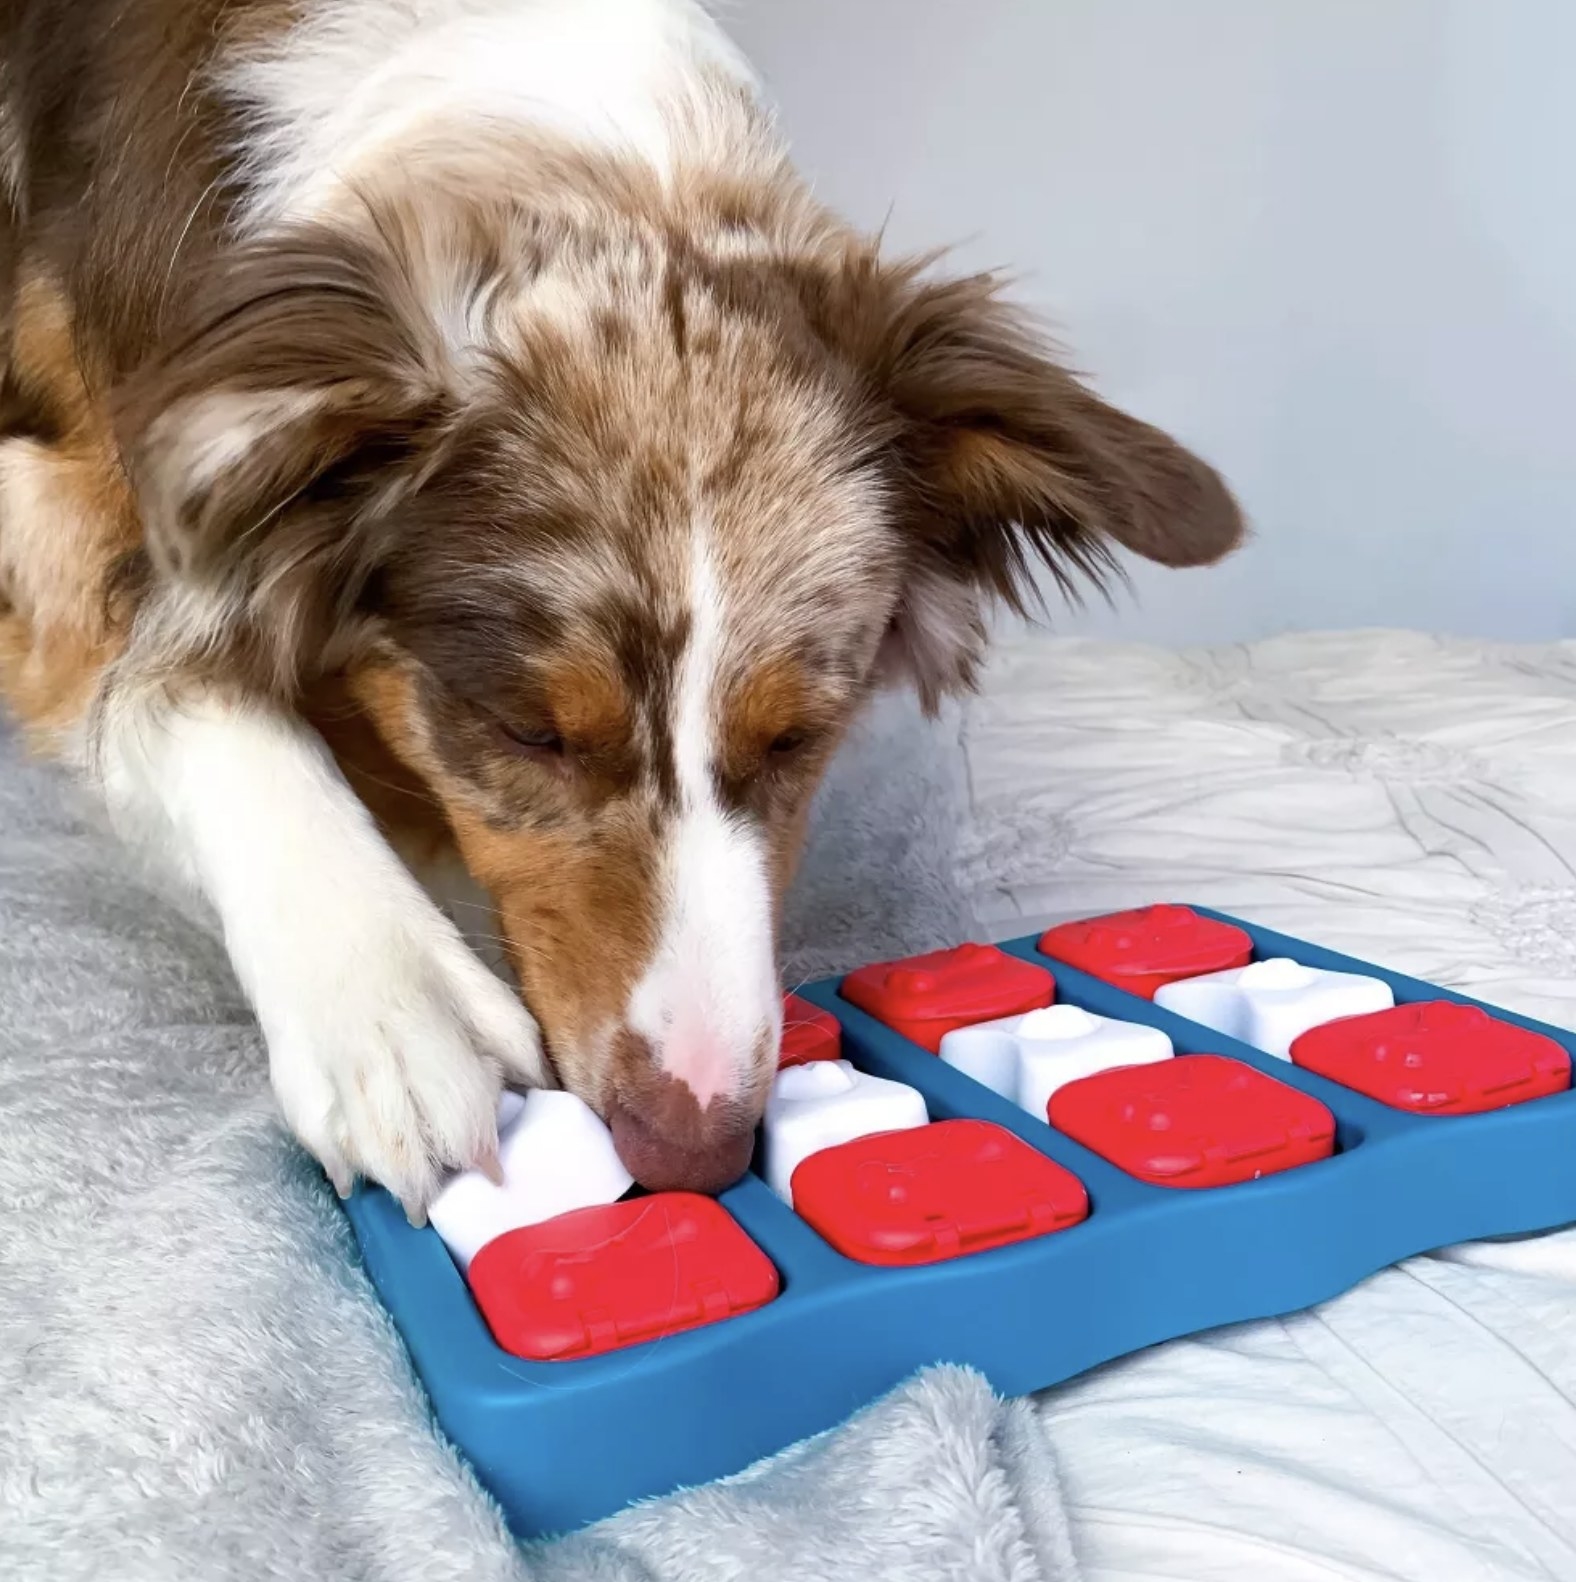 a dog playing with the interactive toy